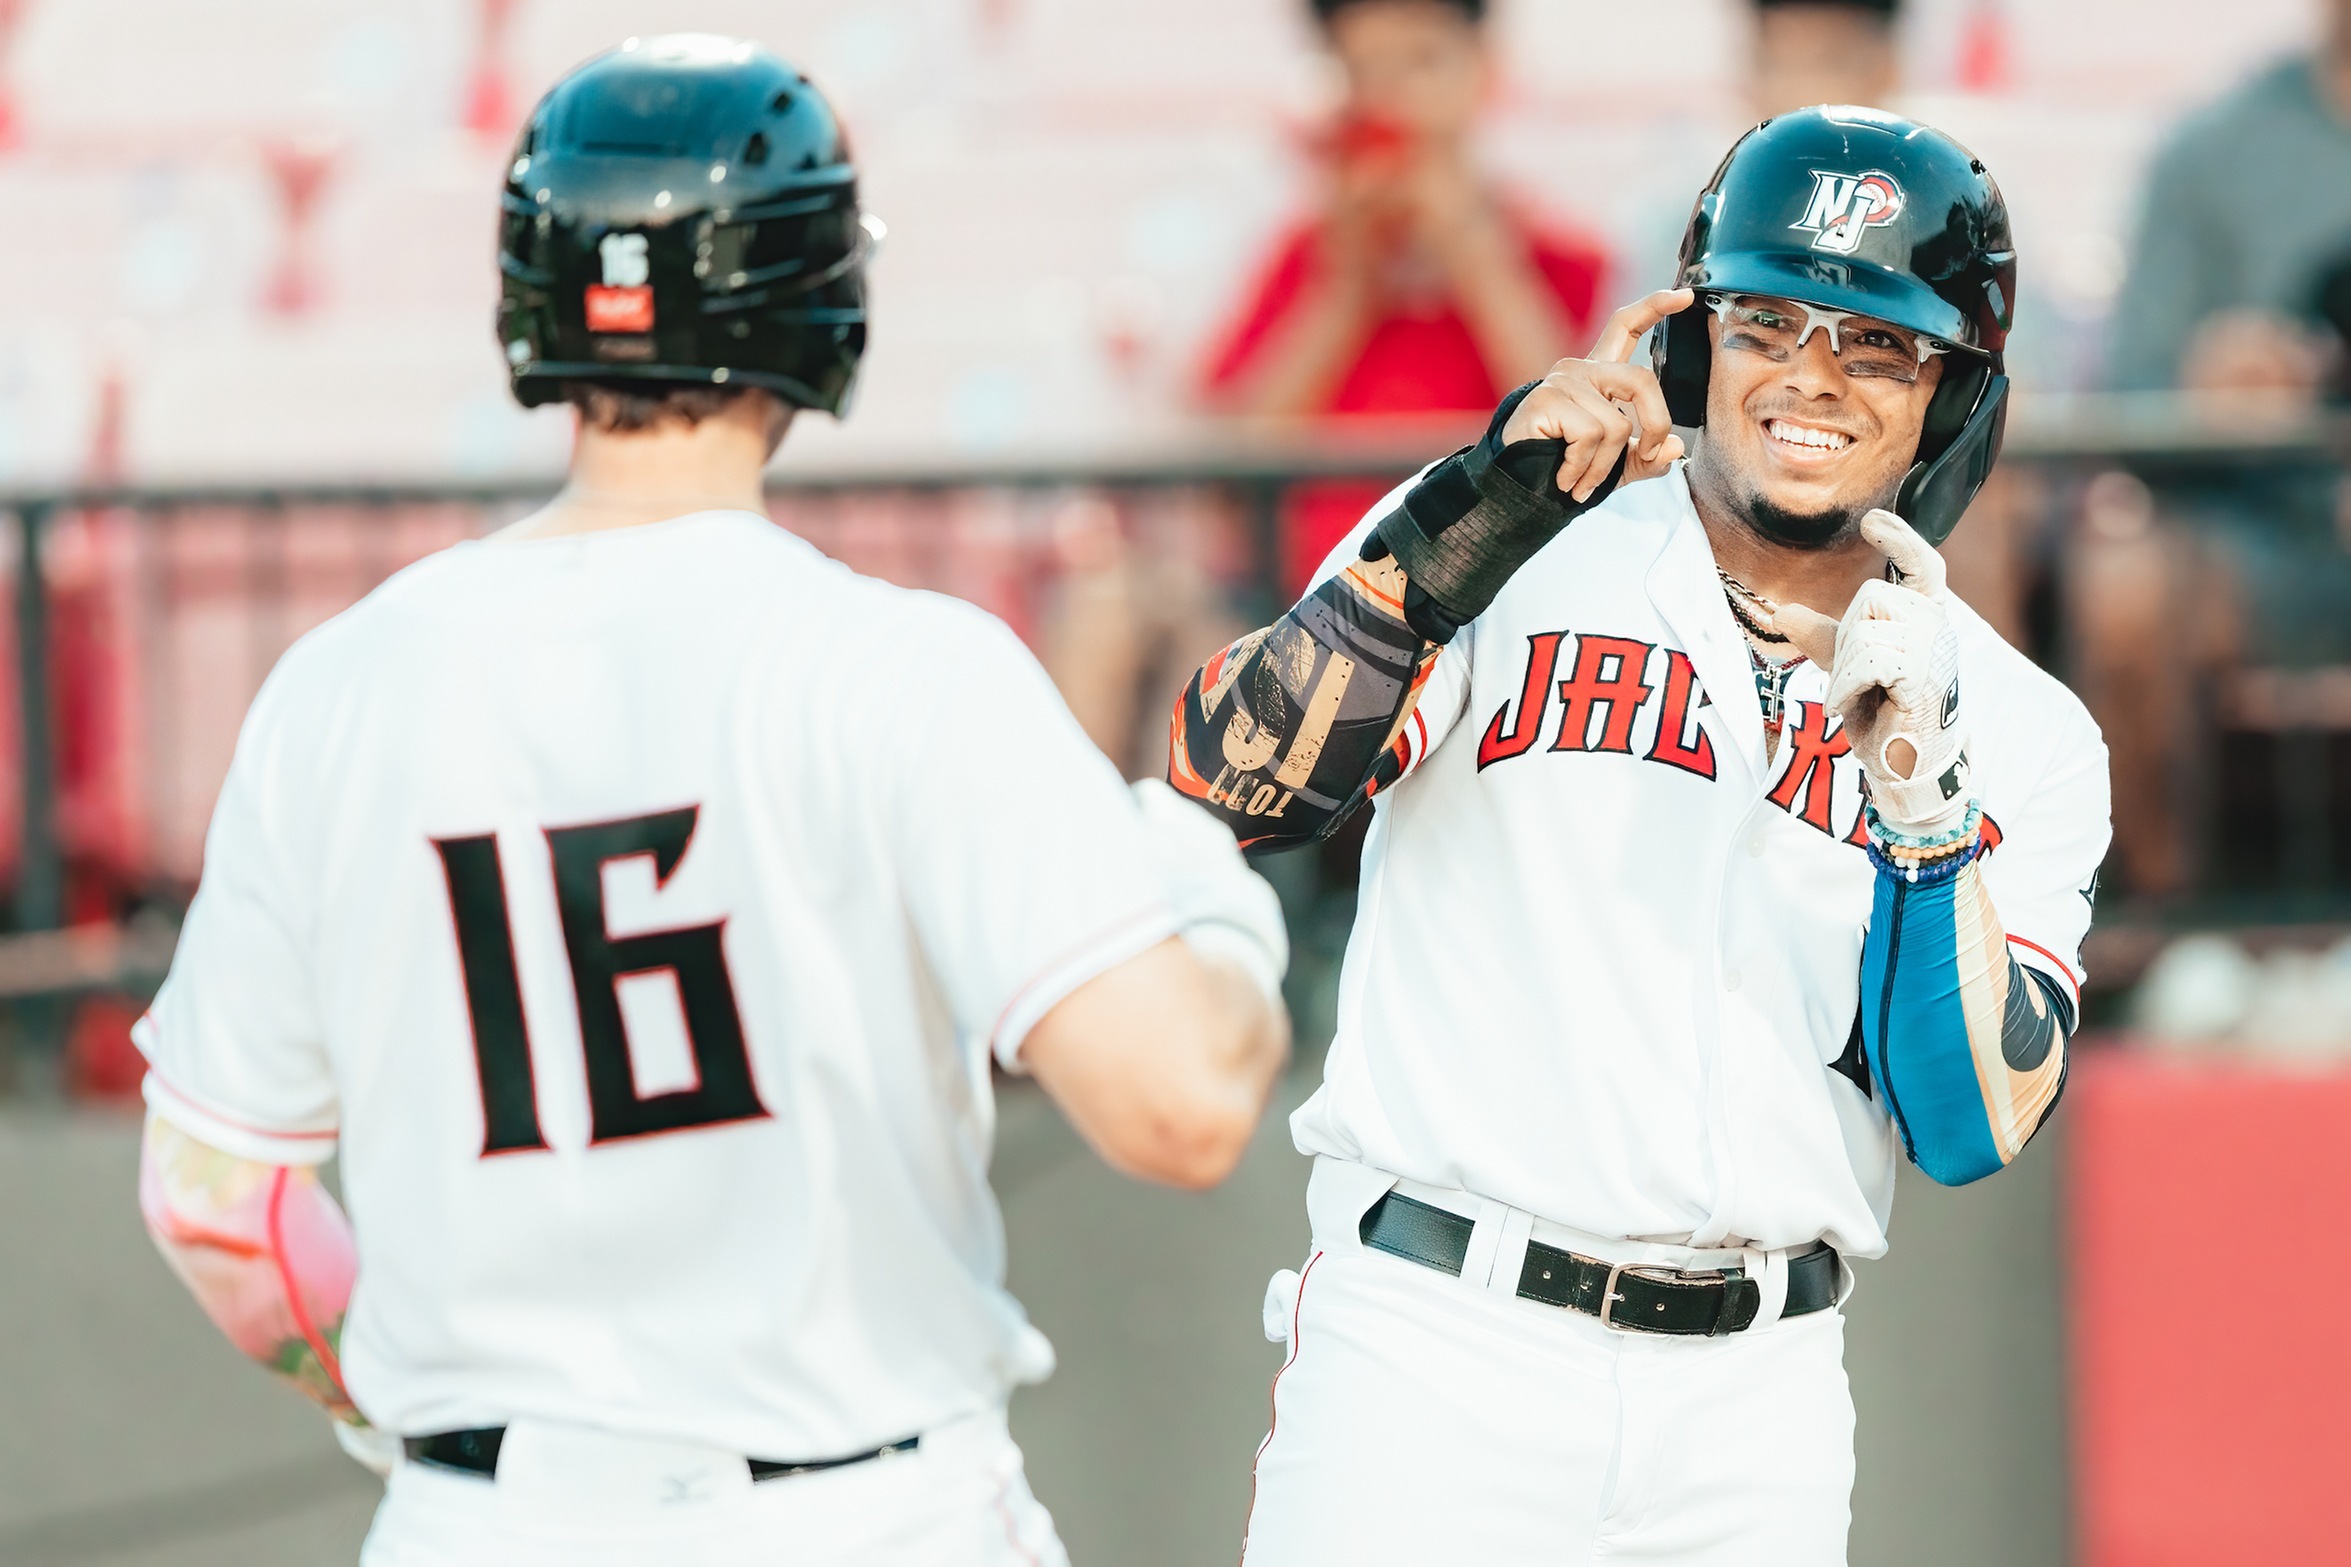 The New Jersey Jackals walk-off against the Slammers avoiding a sweep. They end a five-game losing streak and win their first game at home.